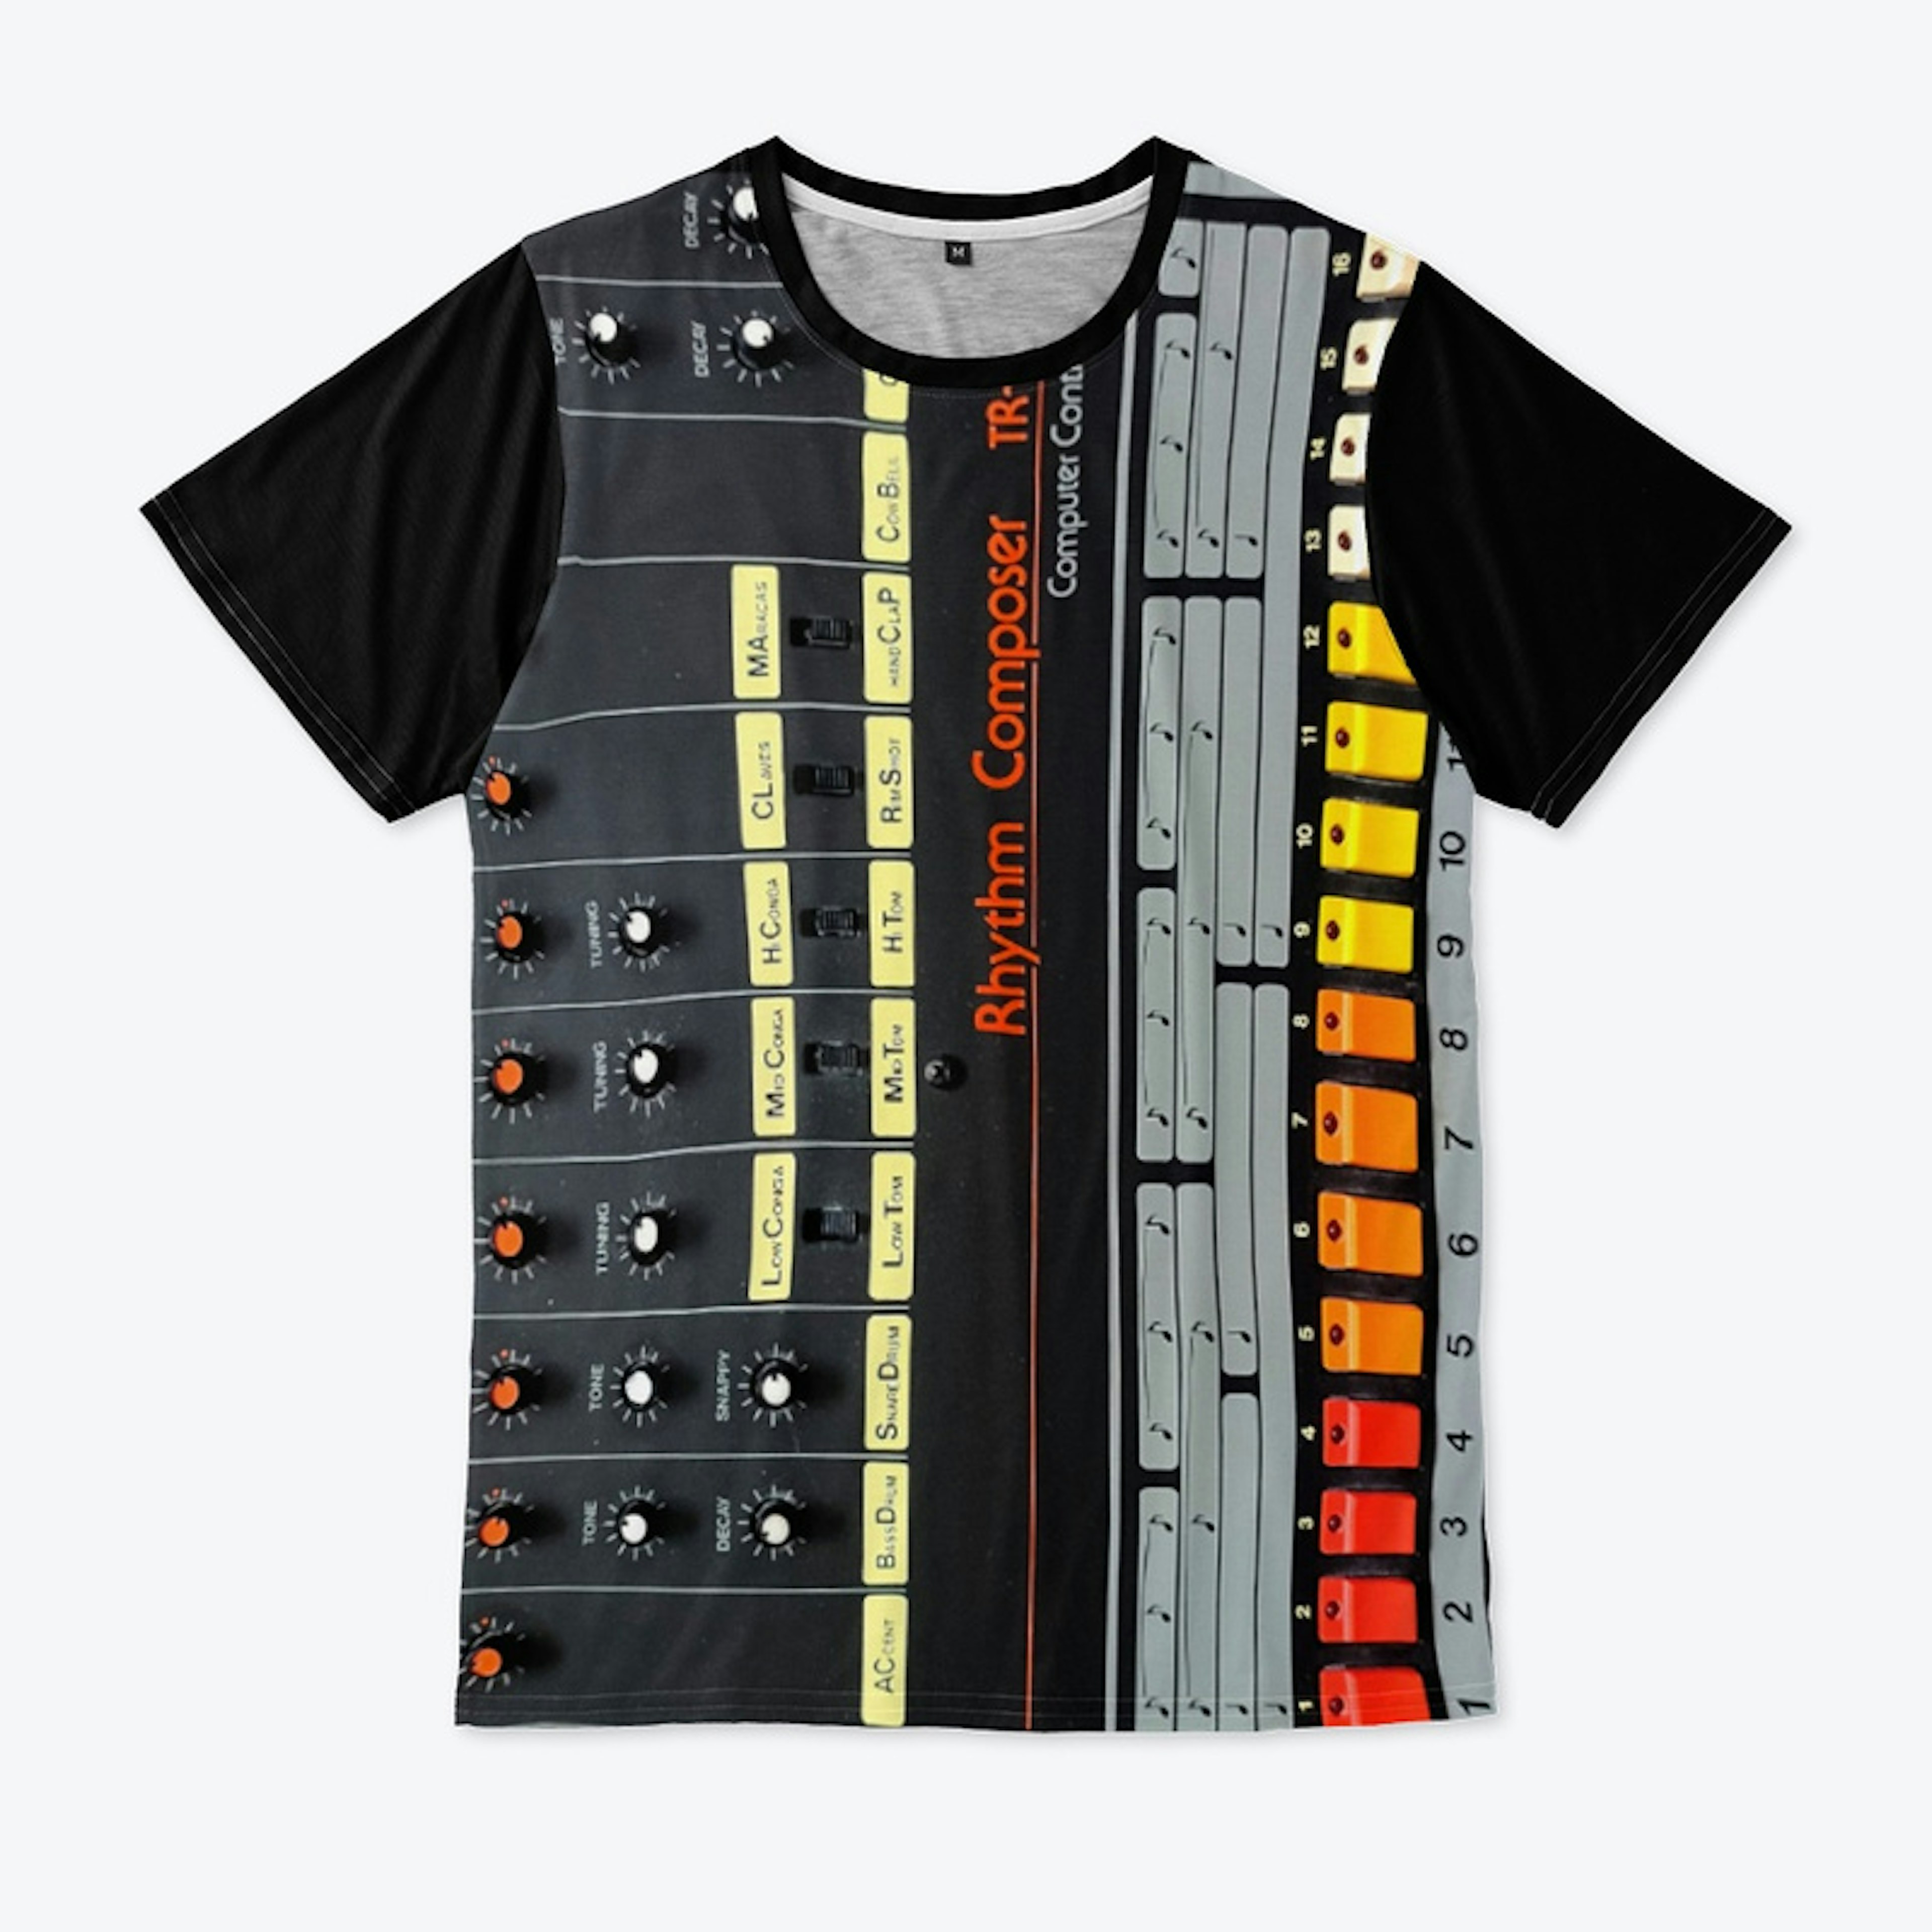 Drum Synth Shirt